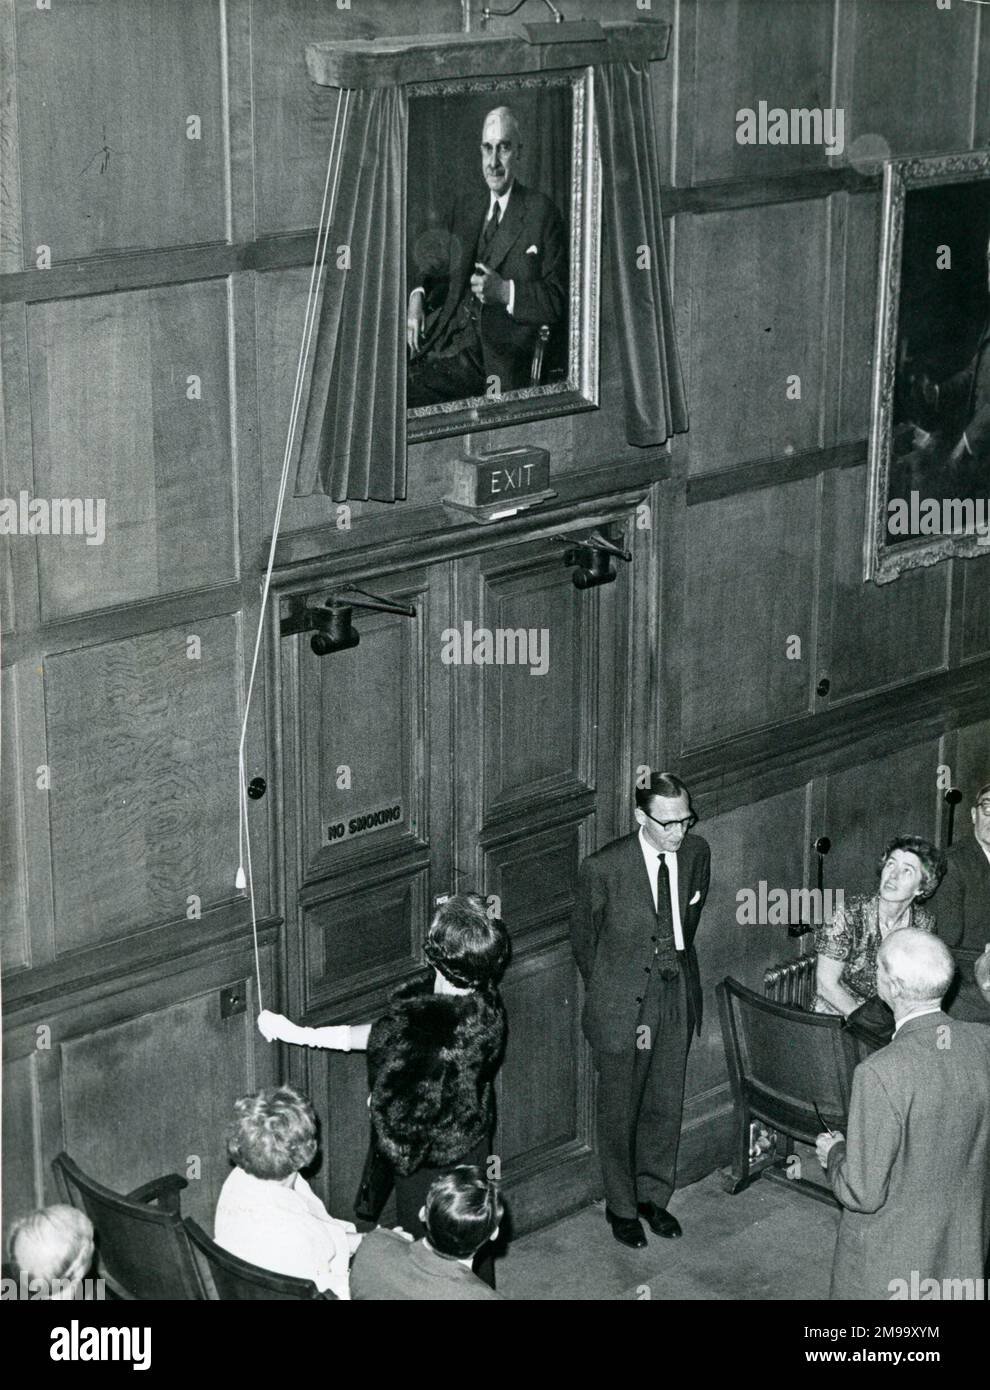 Miss Stanier unveiling Sir William Stanier's portrait at IMechE, during meeting 6 Oct 1966. Watched by Lord christopher Hinton [bottom right, back to camera]. Stock Photo